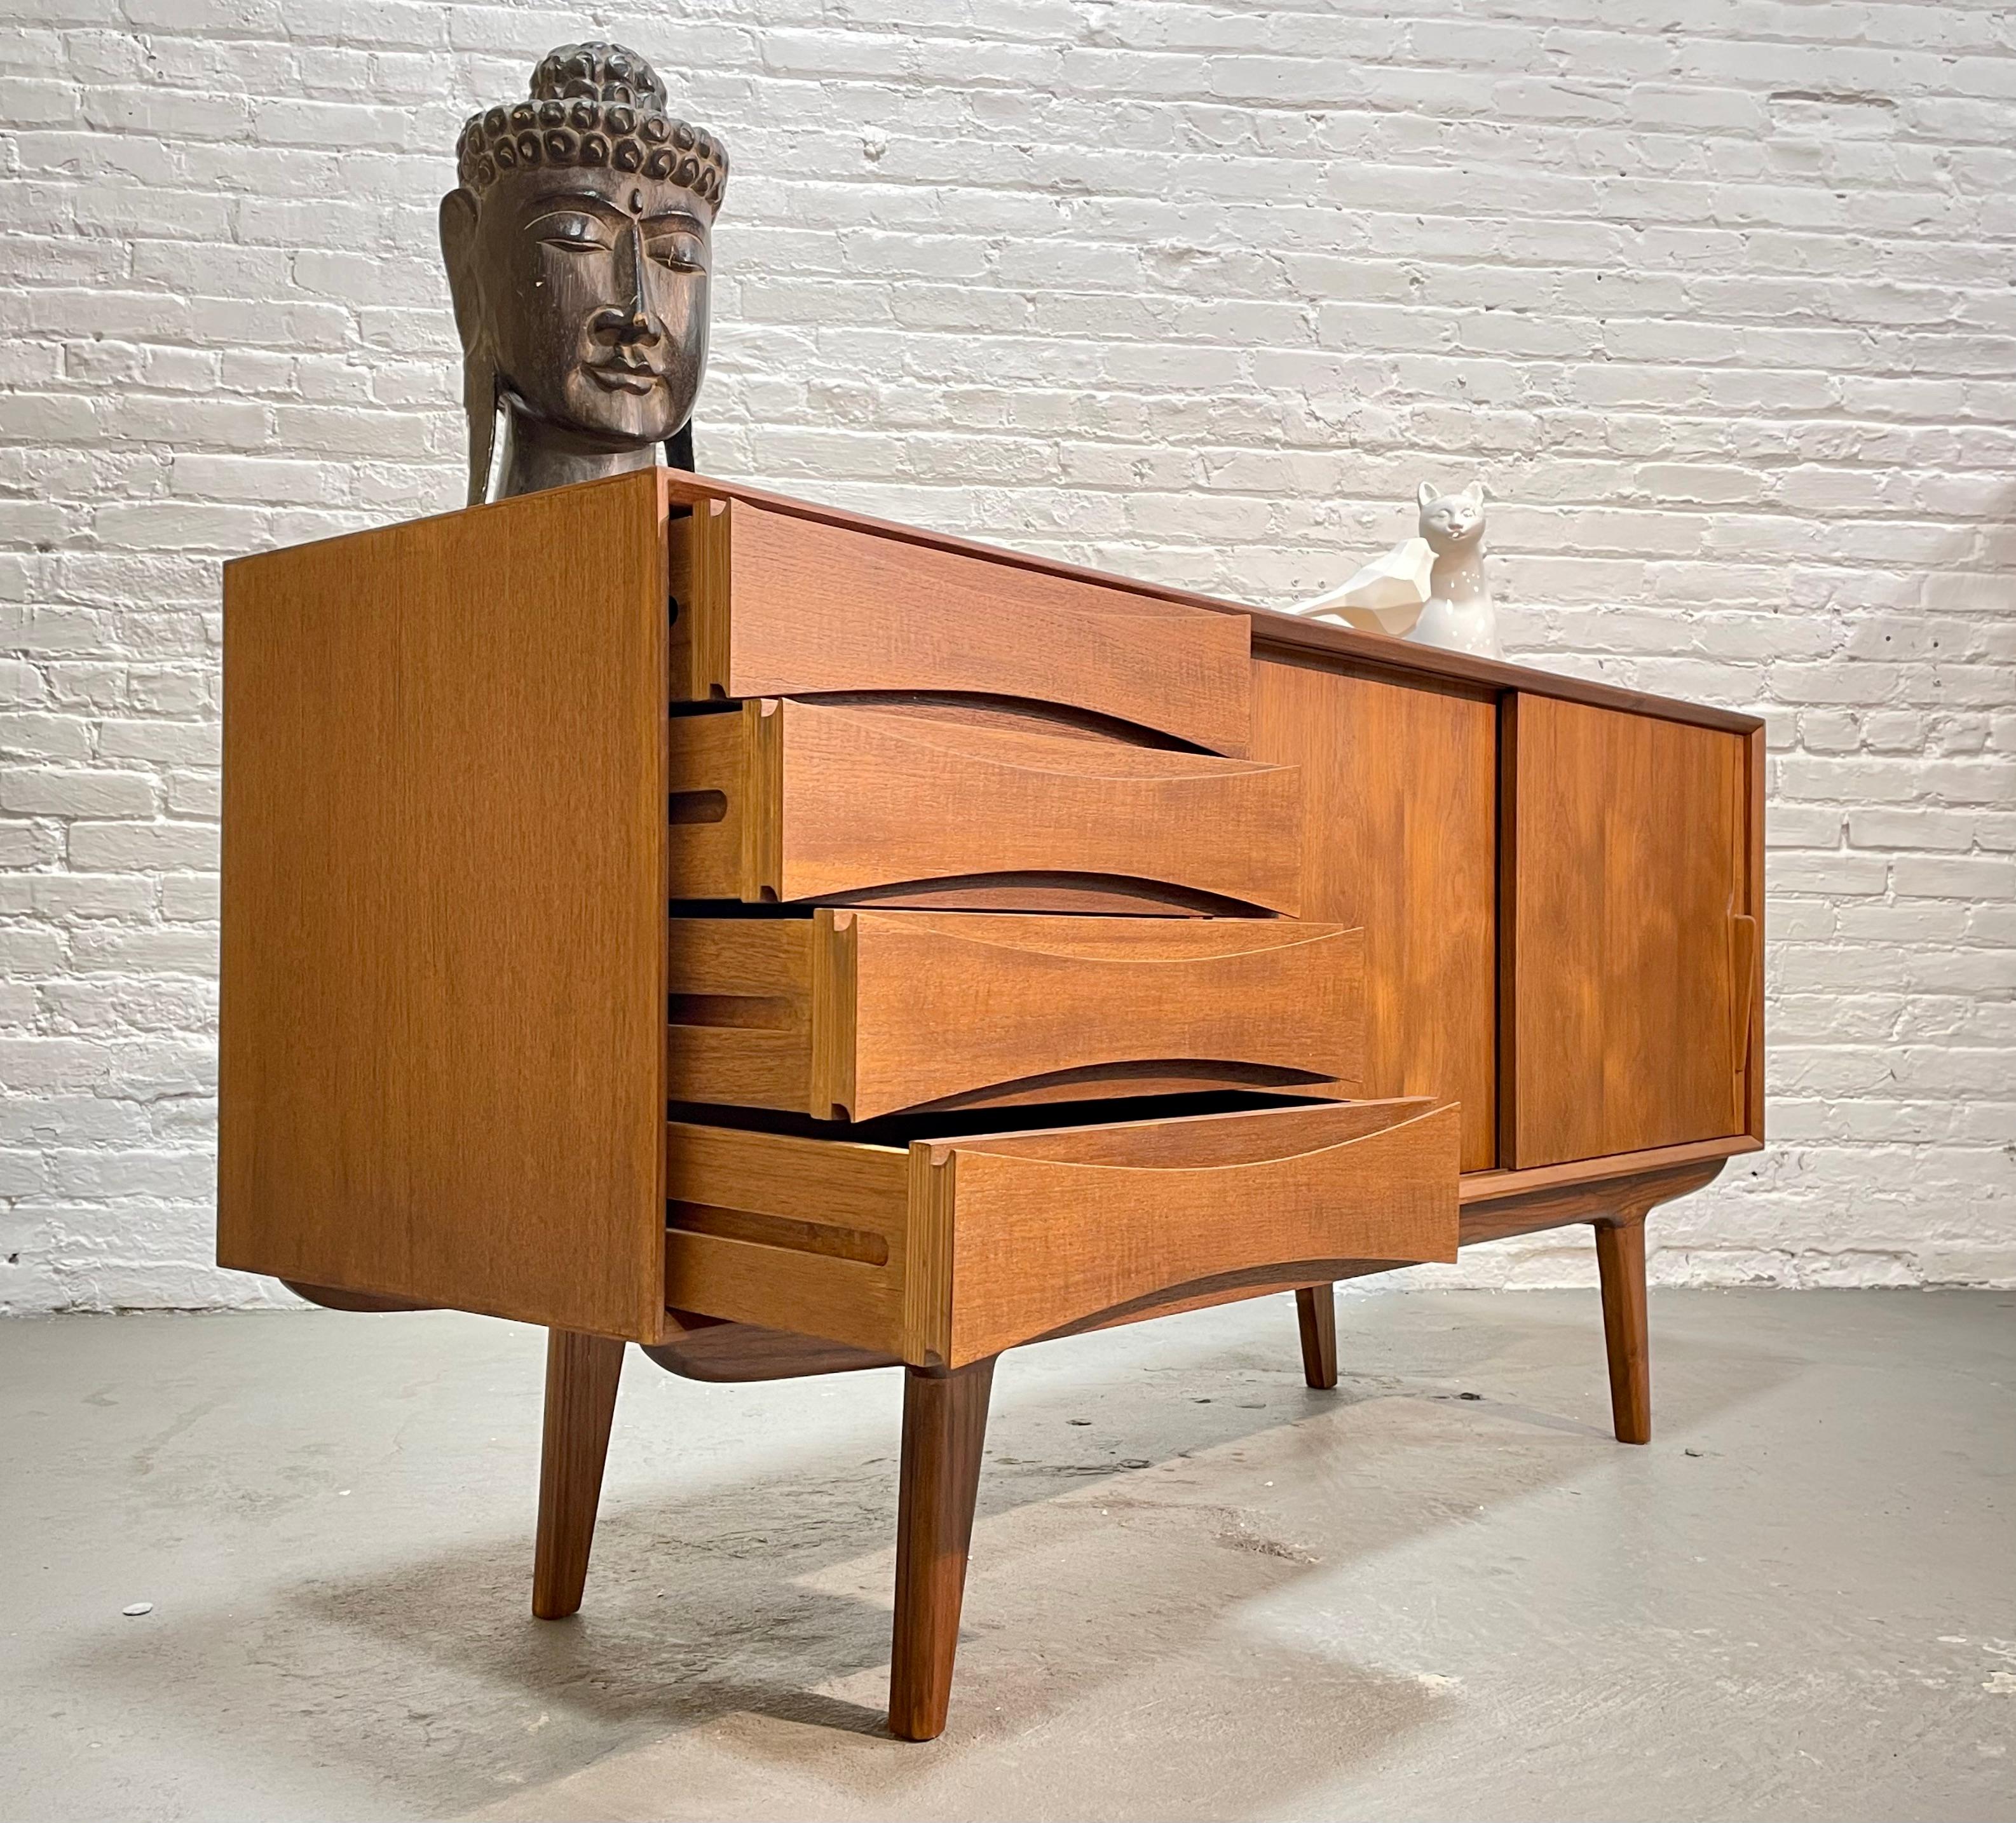  Handsome Mid Century MODERN styled SIDEBOARD / CREDENZA media stand For Sale 4